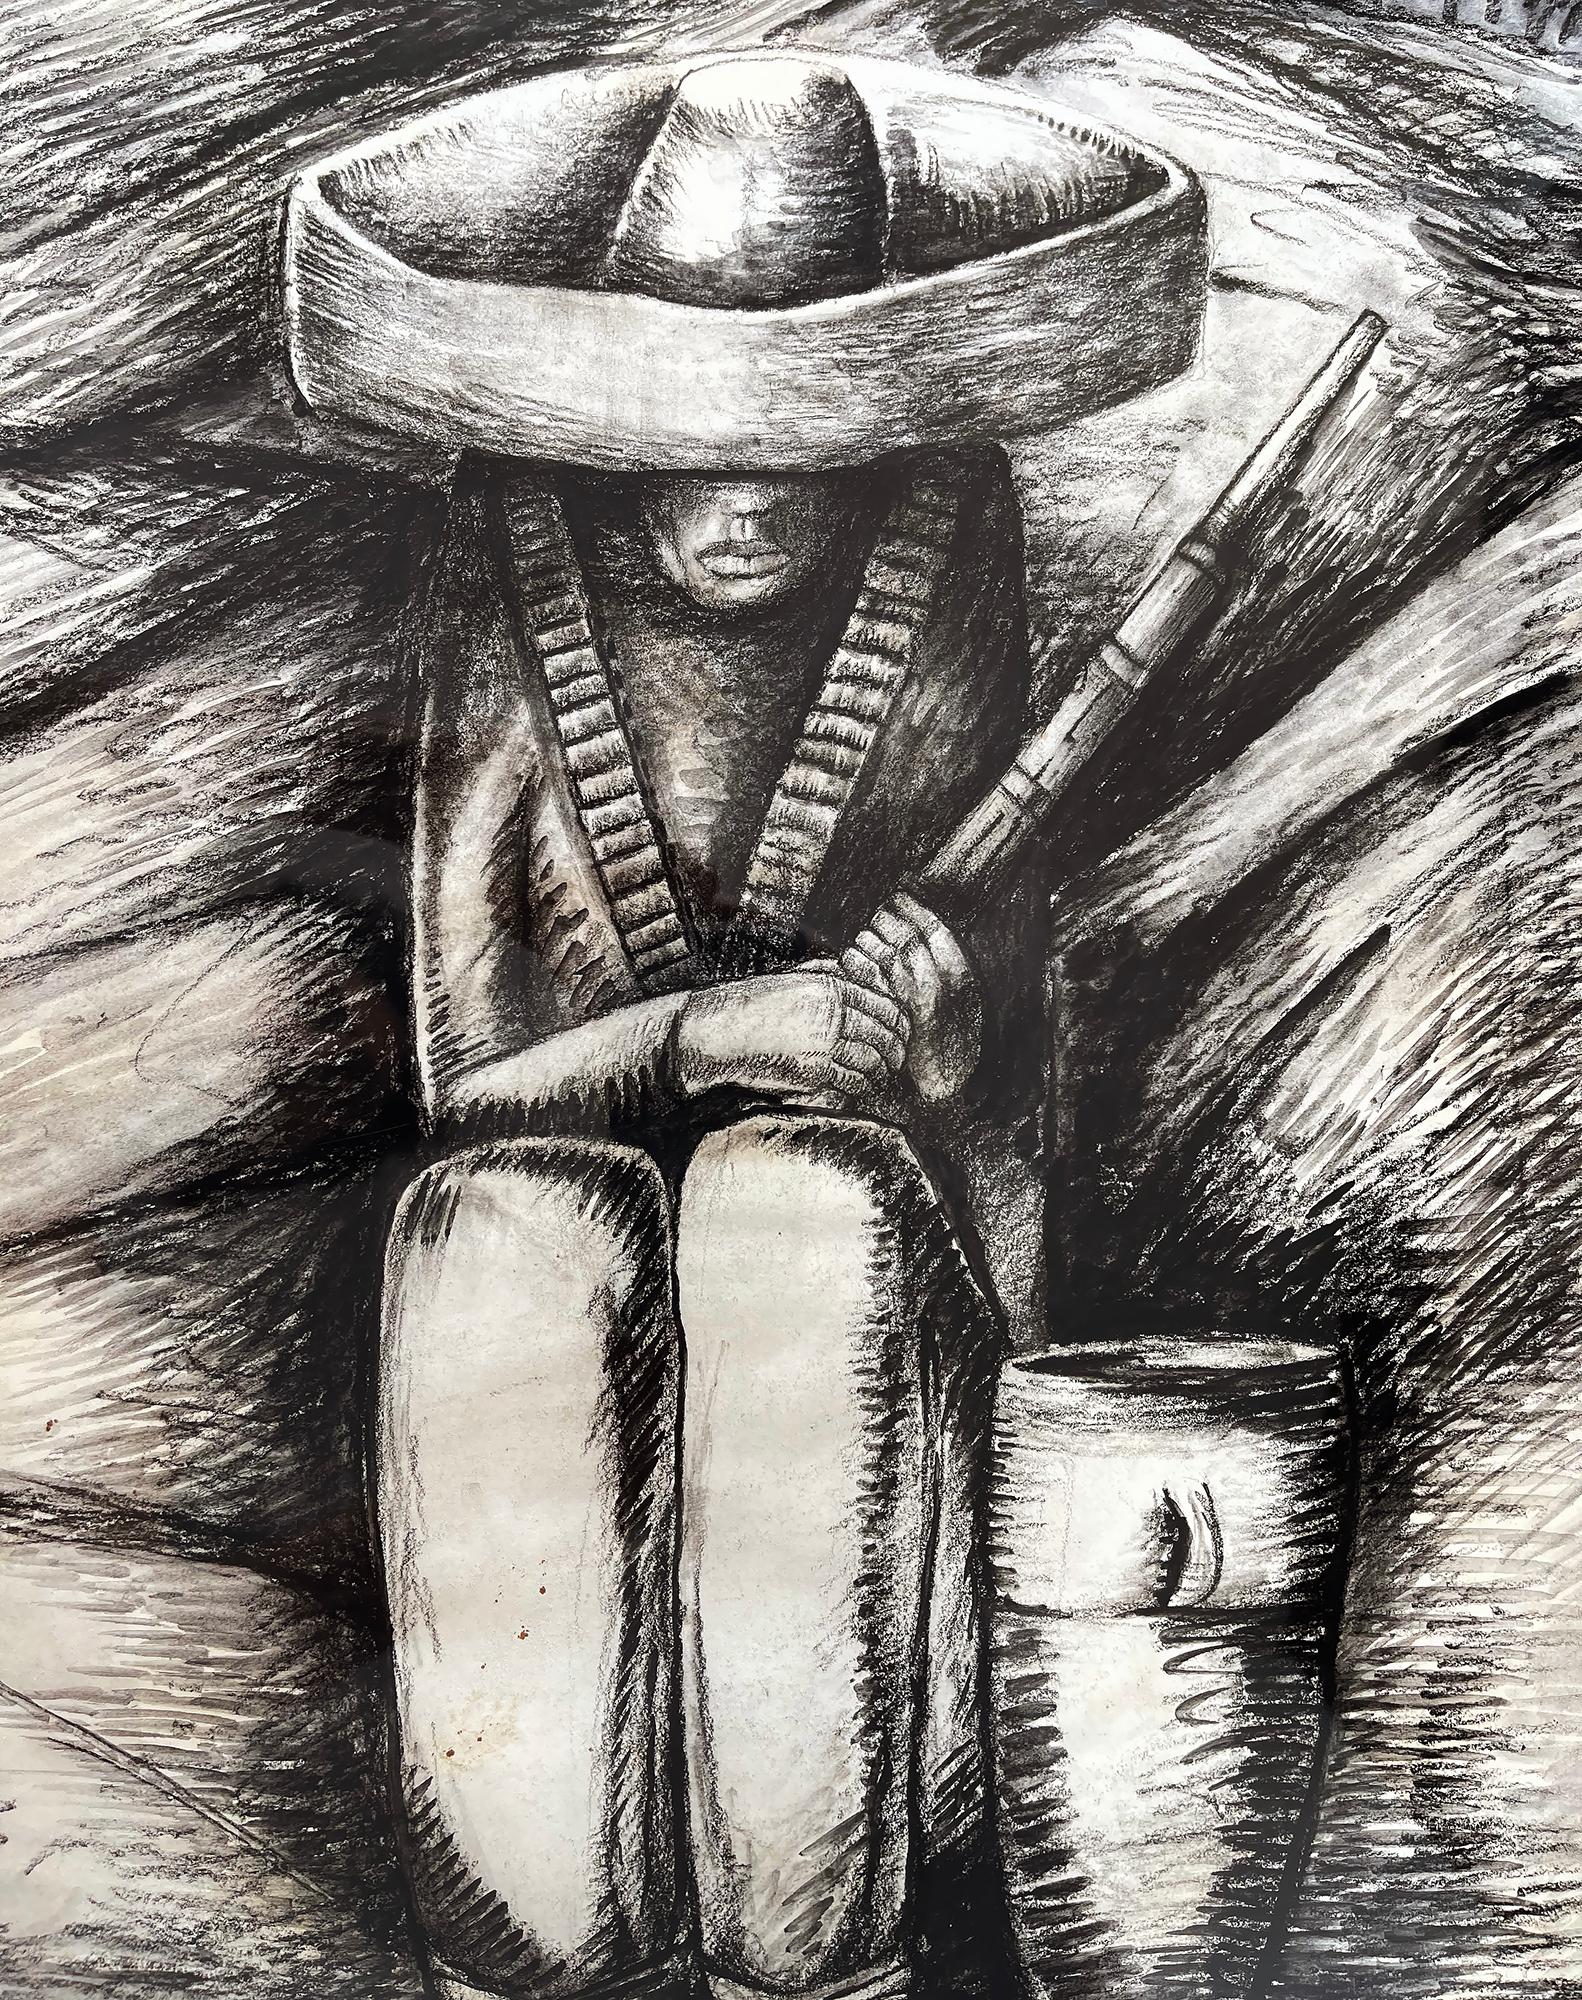 Zapatista Asentado
circa 1932
Conte crayon and wash on paper
24 x 14 inches (61.0 x 35.6 cm)
Signed lower left: Ramos-Martinez Signed lower left: Ramos-Martinez
Accompanied by a letter of authenticity from The Alfredo Ramos Martinez Research